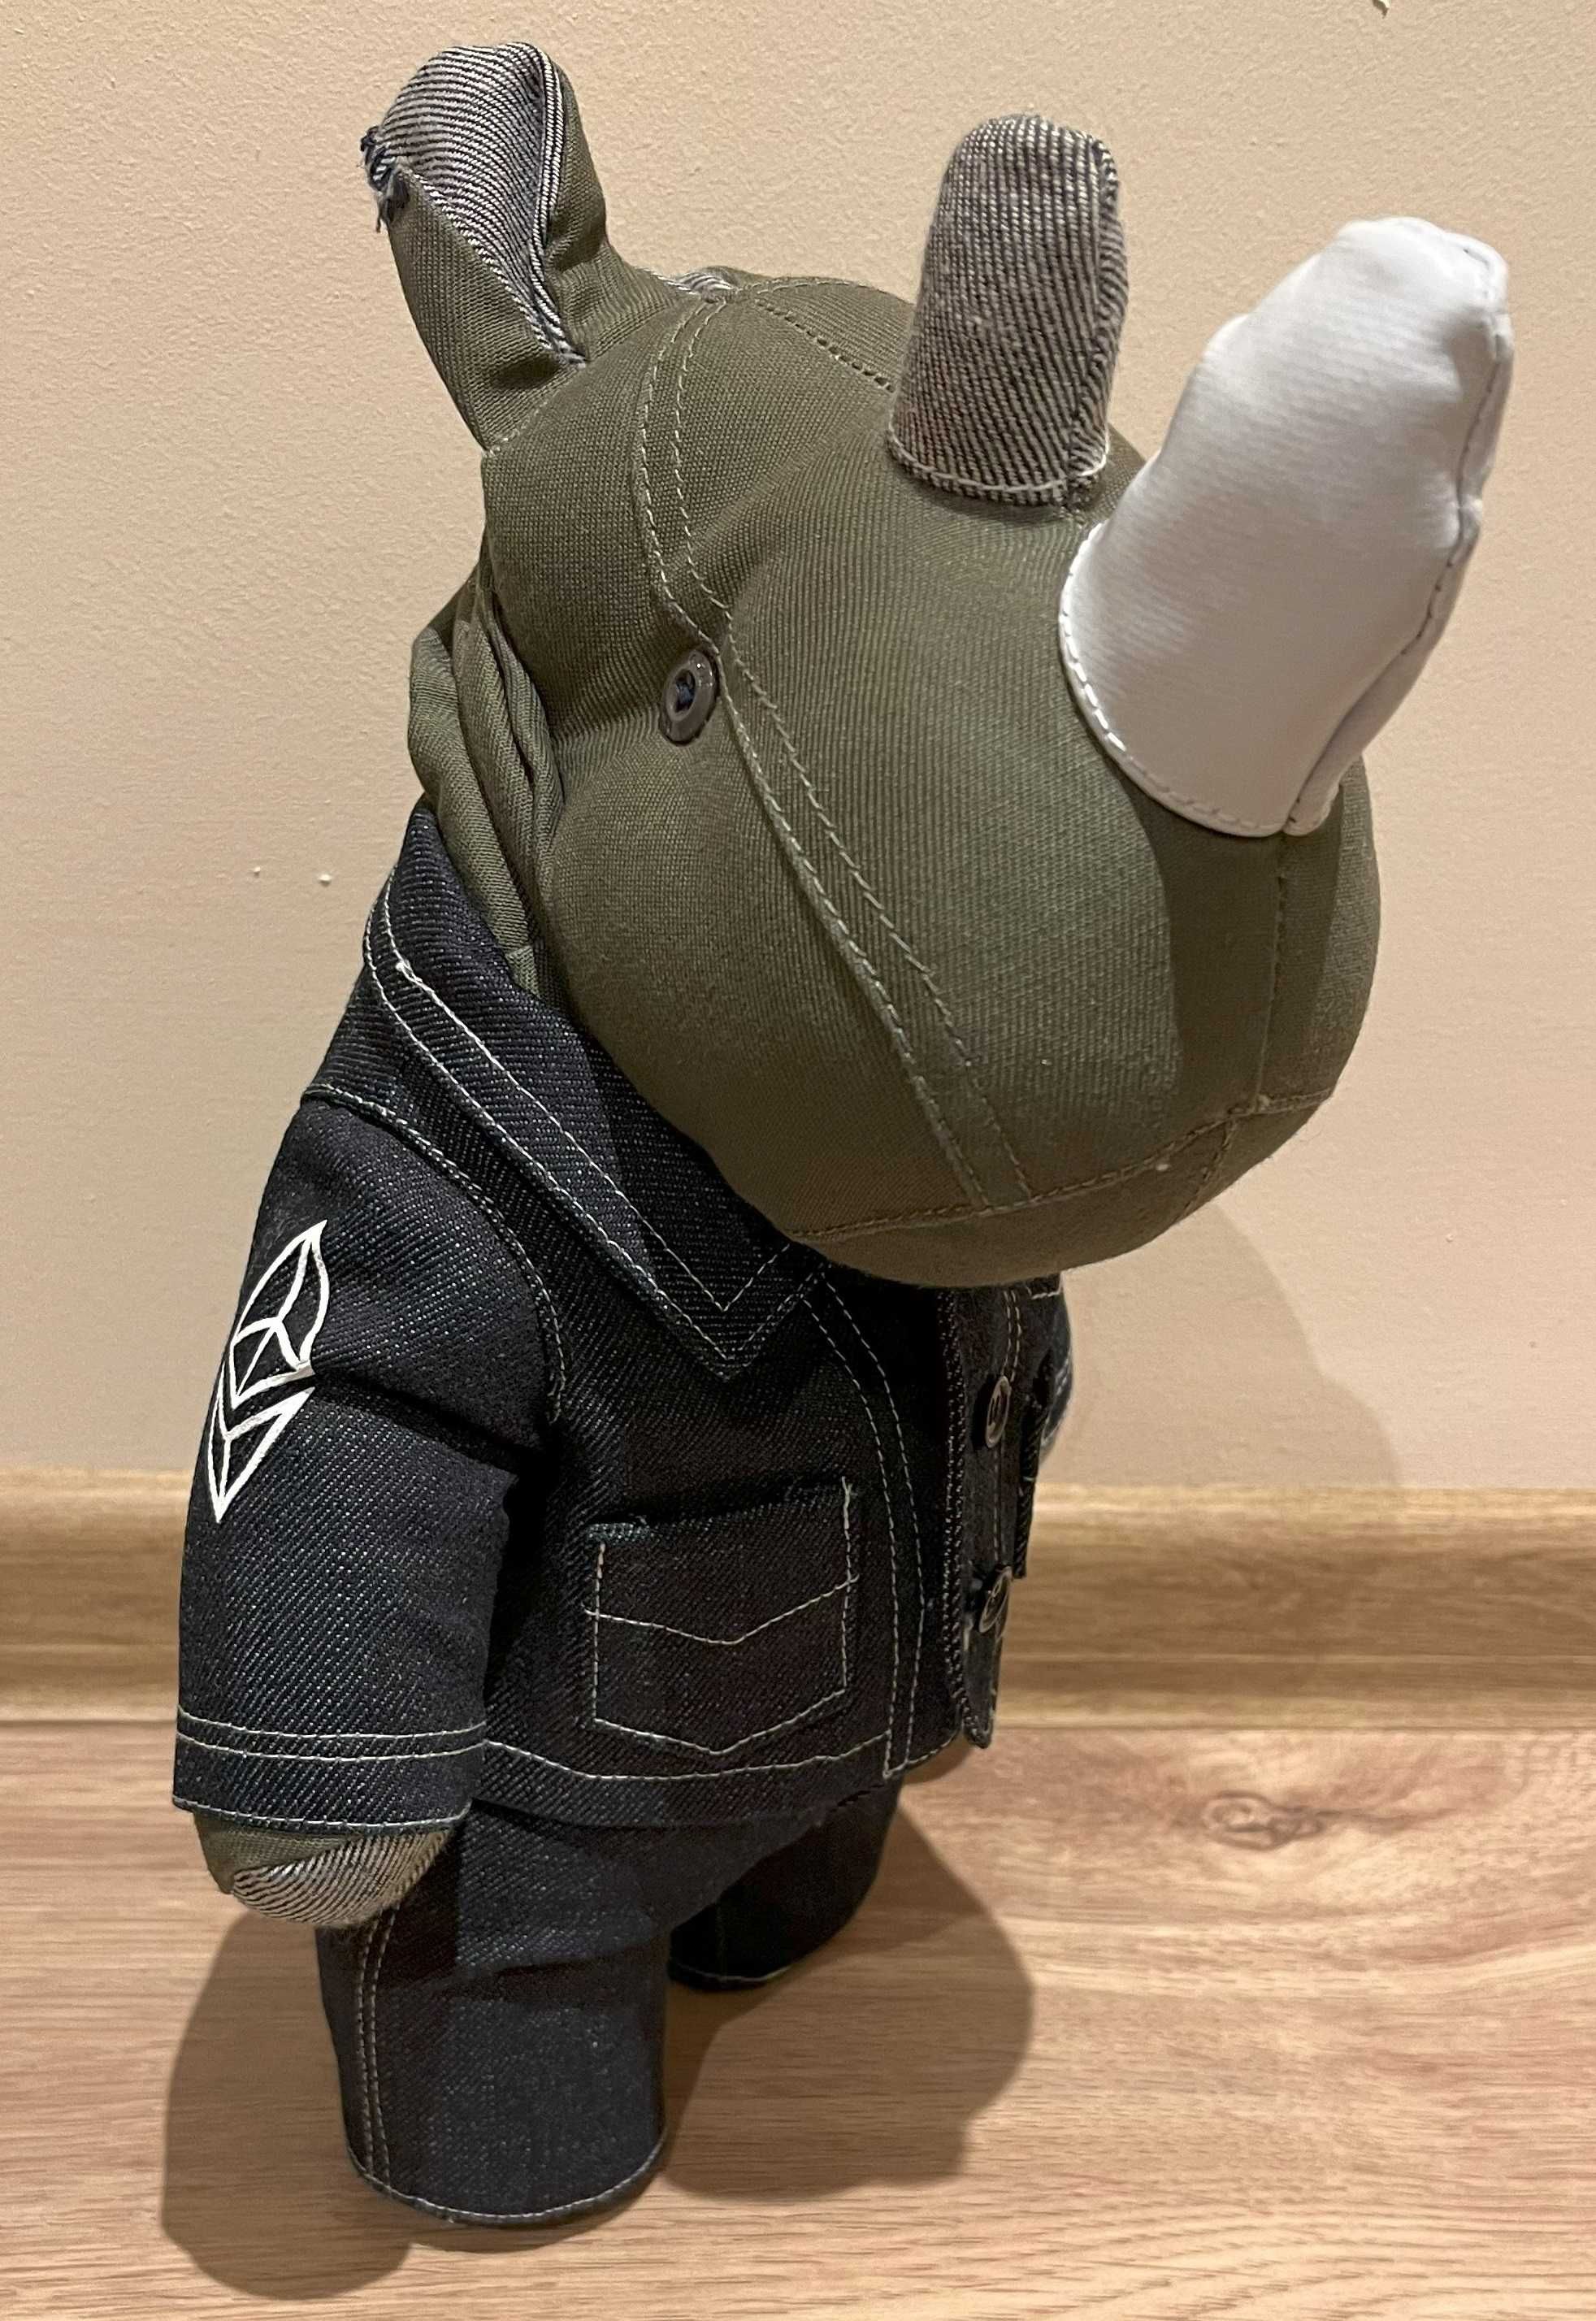 G-Star Raw G-NO Rhino Collectible NFT edition (Limited Edition)